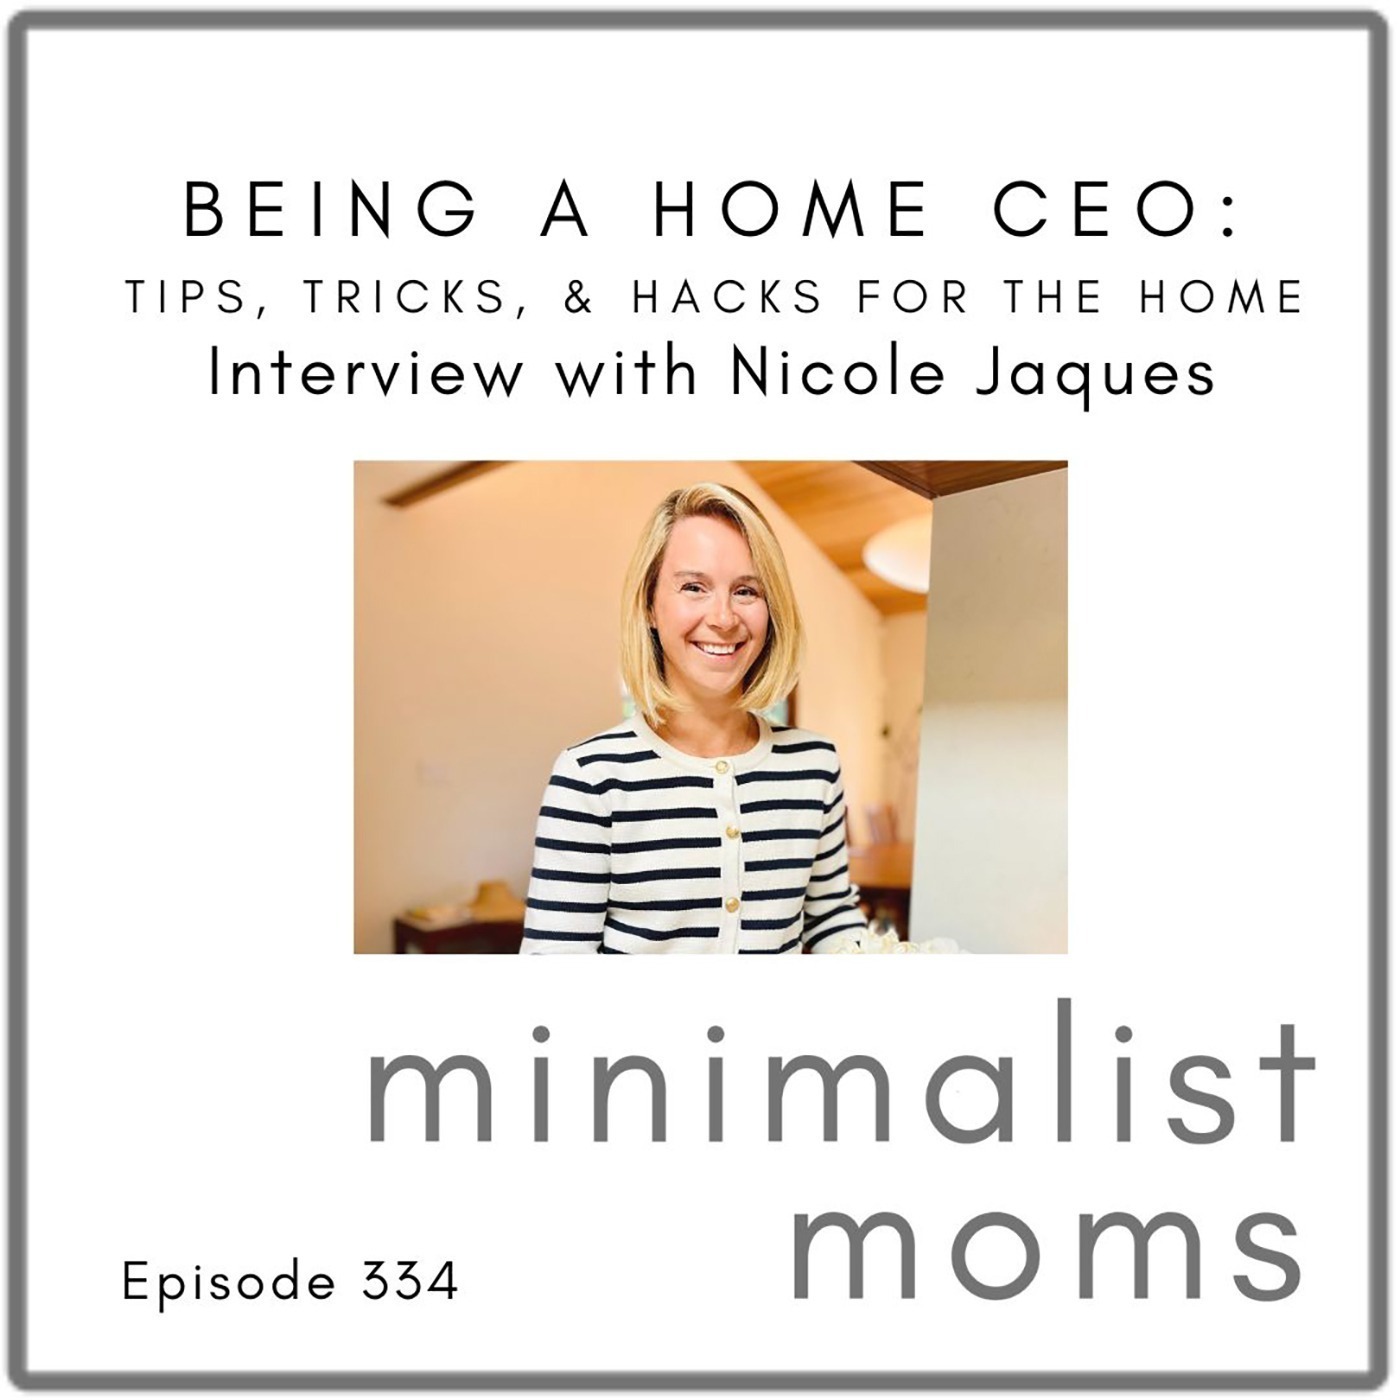 Being a Home CEO: Tips, Tricks & Hacks for the Home with Nicole Jaques (EP334)